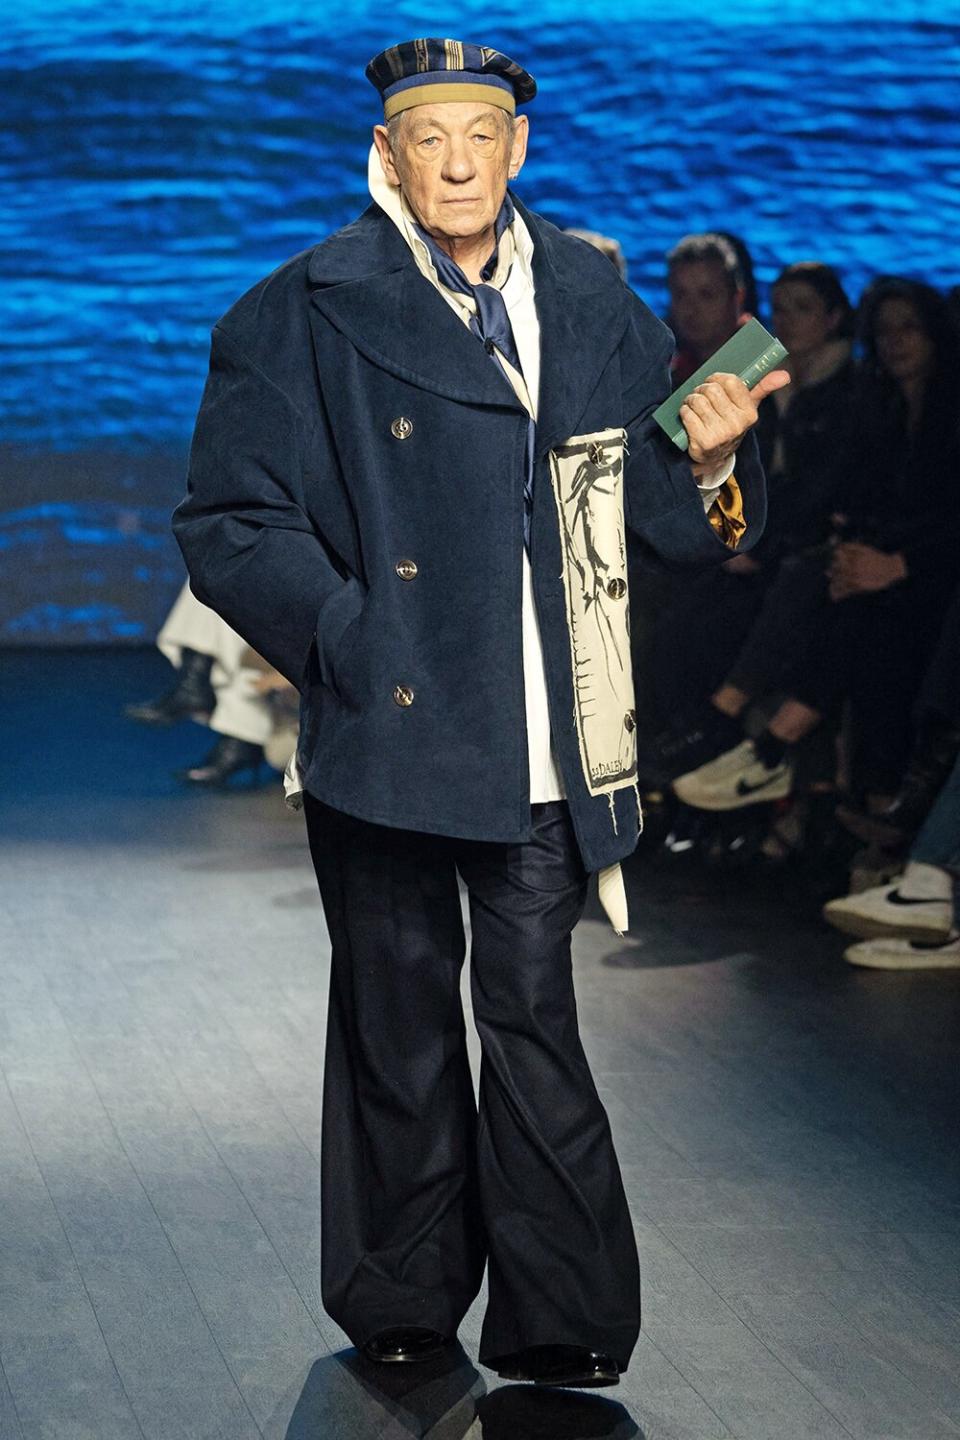 TOPSHOT - British actor Ian McKellen attends British fashion label S.S.Daley's Autumn/Winter 2023 collection catwalk show on the third day of the London Fashion Week, in London, on February 19, 2023. - RESTRICTED TO EDITORIAL USE (Photo by Niklas HALLE'N / AFP) / RESTRICTED TO EDITORIAL USE (Photo by NIKLAS HALLE'N/AFP via Getty Images)